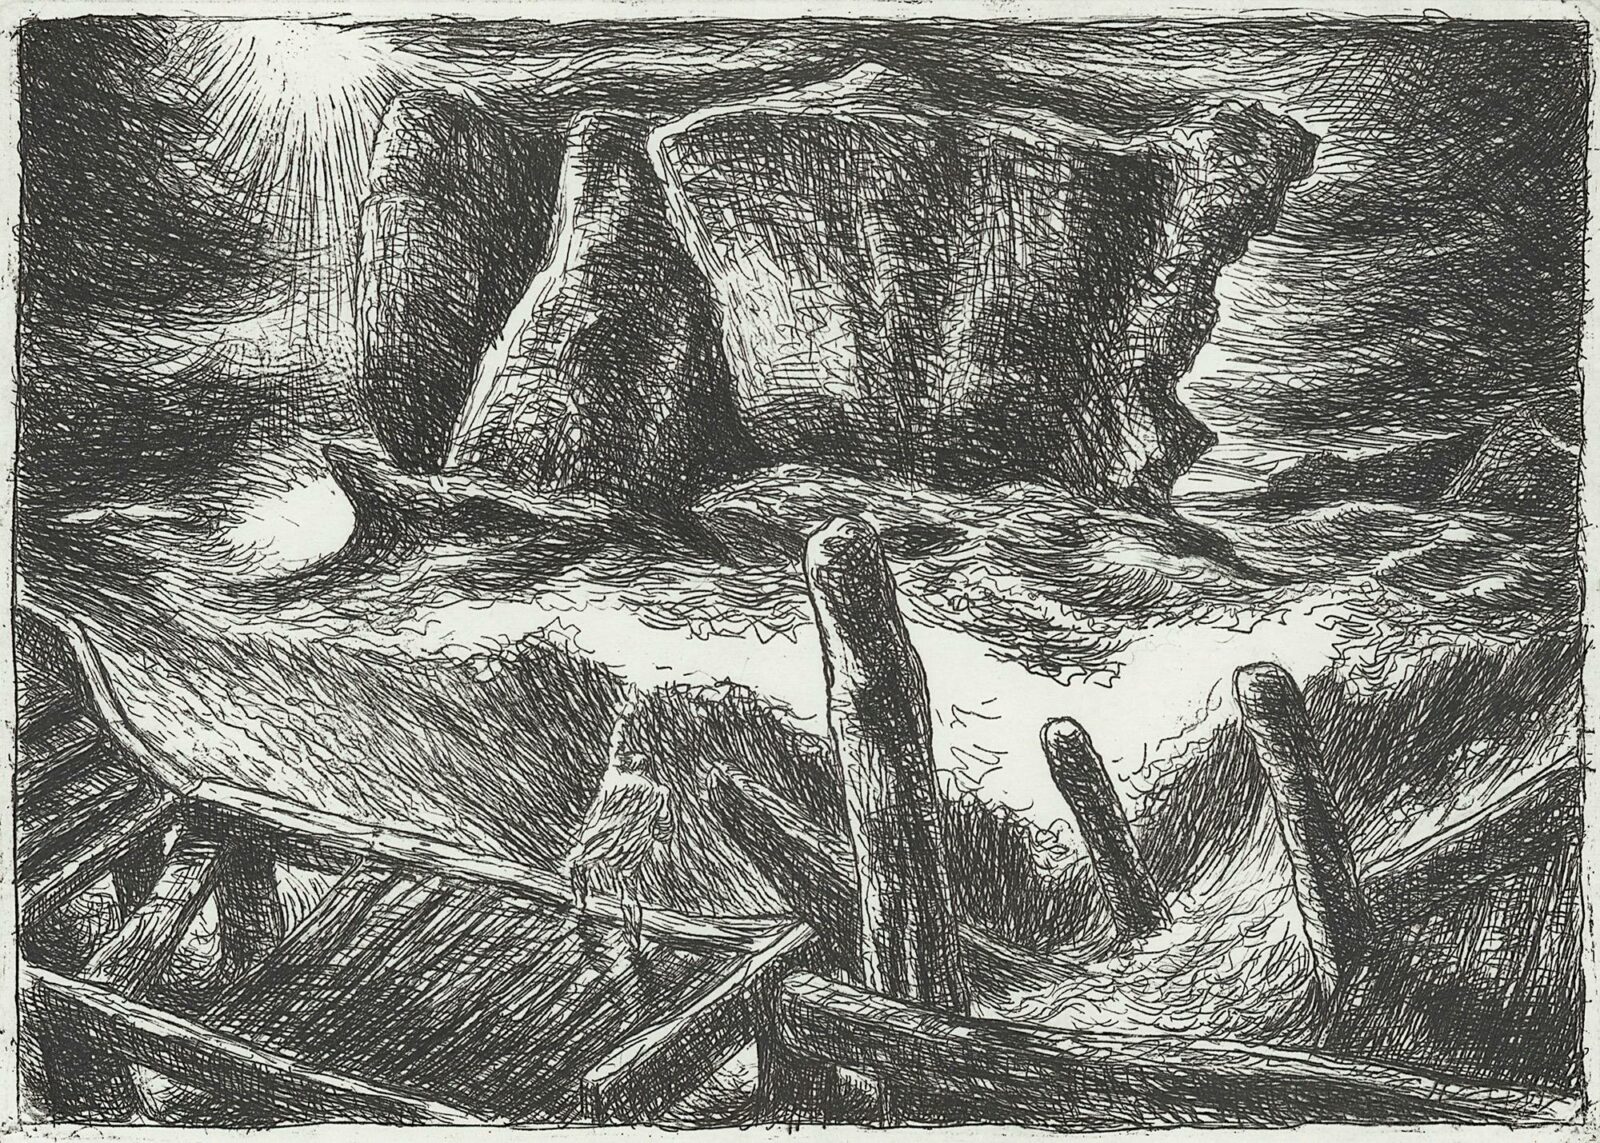 etching of a solitary rock formation against a vast ocean